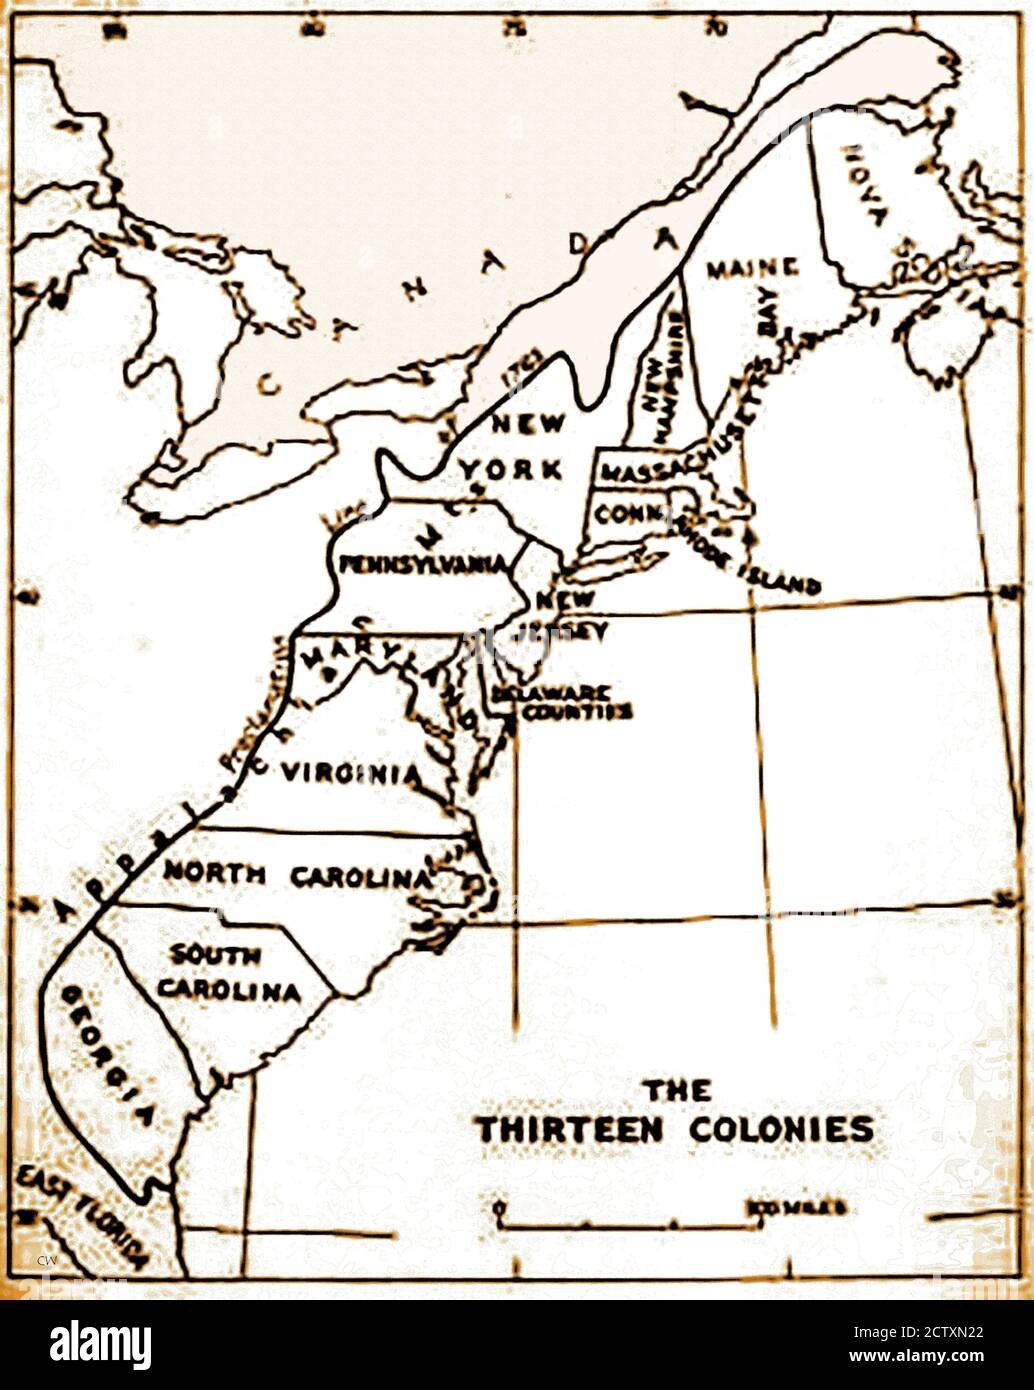 An historical map of the original 13 colonies of the USA. Spain claimed all the land from the Mississippi River  to the Pacific Ocean, plus  the Gulf of Mexico.The Treaty of Paris created a new nation in 1783 and doubled the size of the original 13 colonies, extending itsboundaries to the Mississippi River. Delaware  (a slave state) was the 1st state to ratify the U.S. Constitution in 1787, Pennsylvania  was the 2nd  in December 12th 1787, declaring itself  a 'Free State'. Days later  Ndew Jersey followed suit. Stock Photo